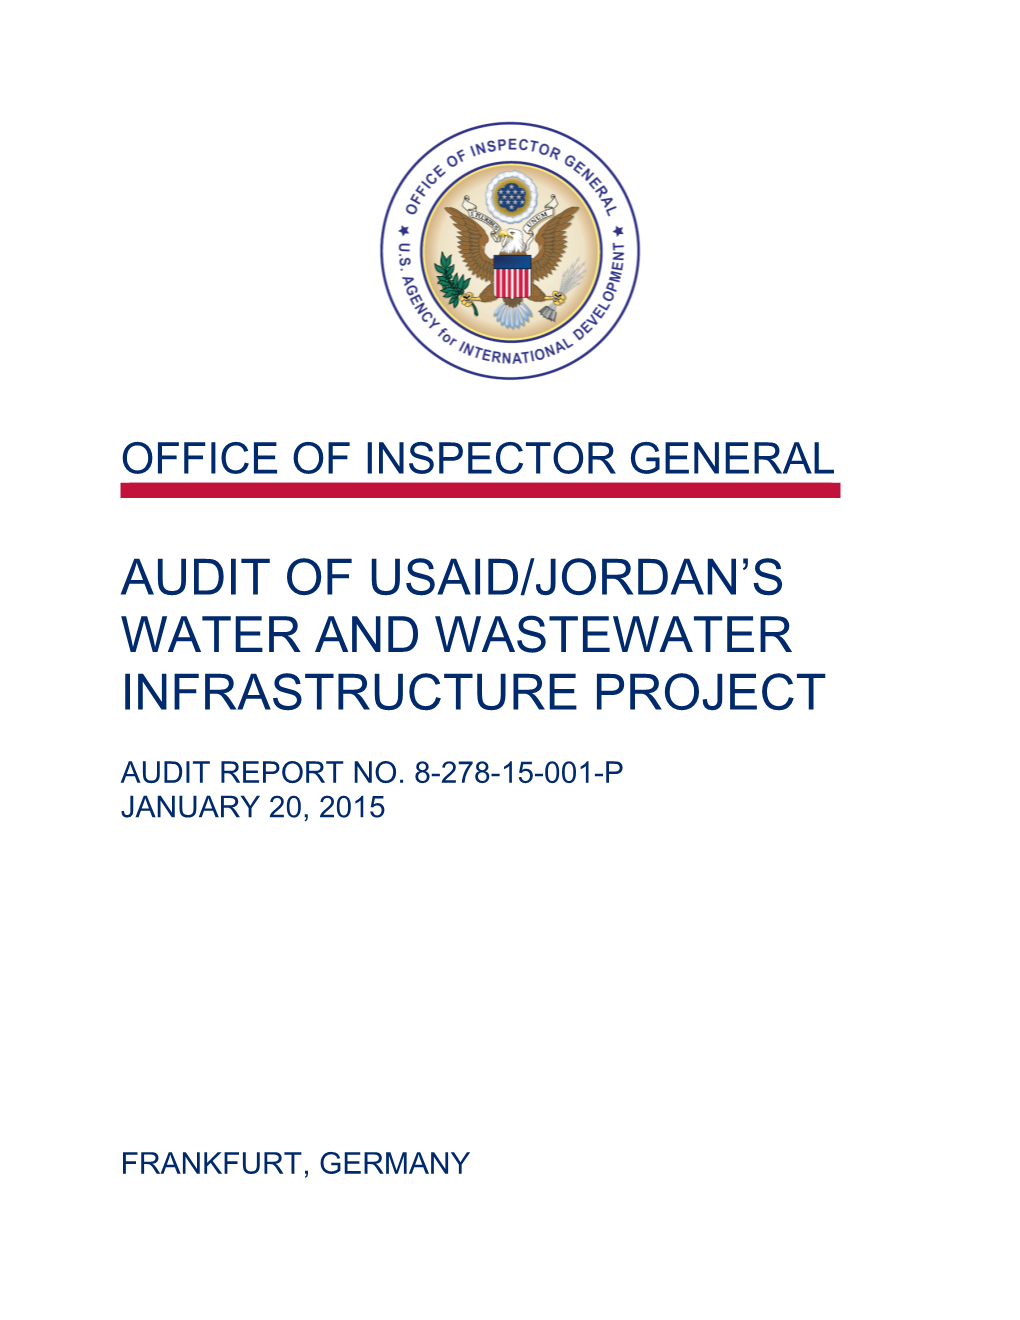 Audit of USAID/Jordan's Water and Wastewater Infrastructure Project